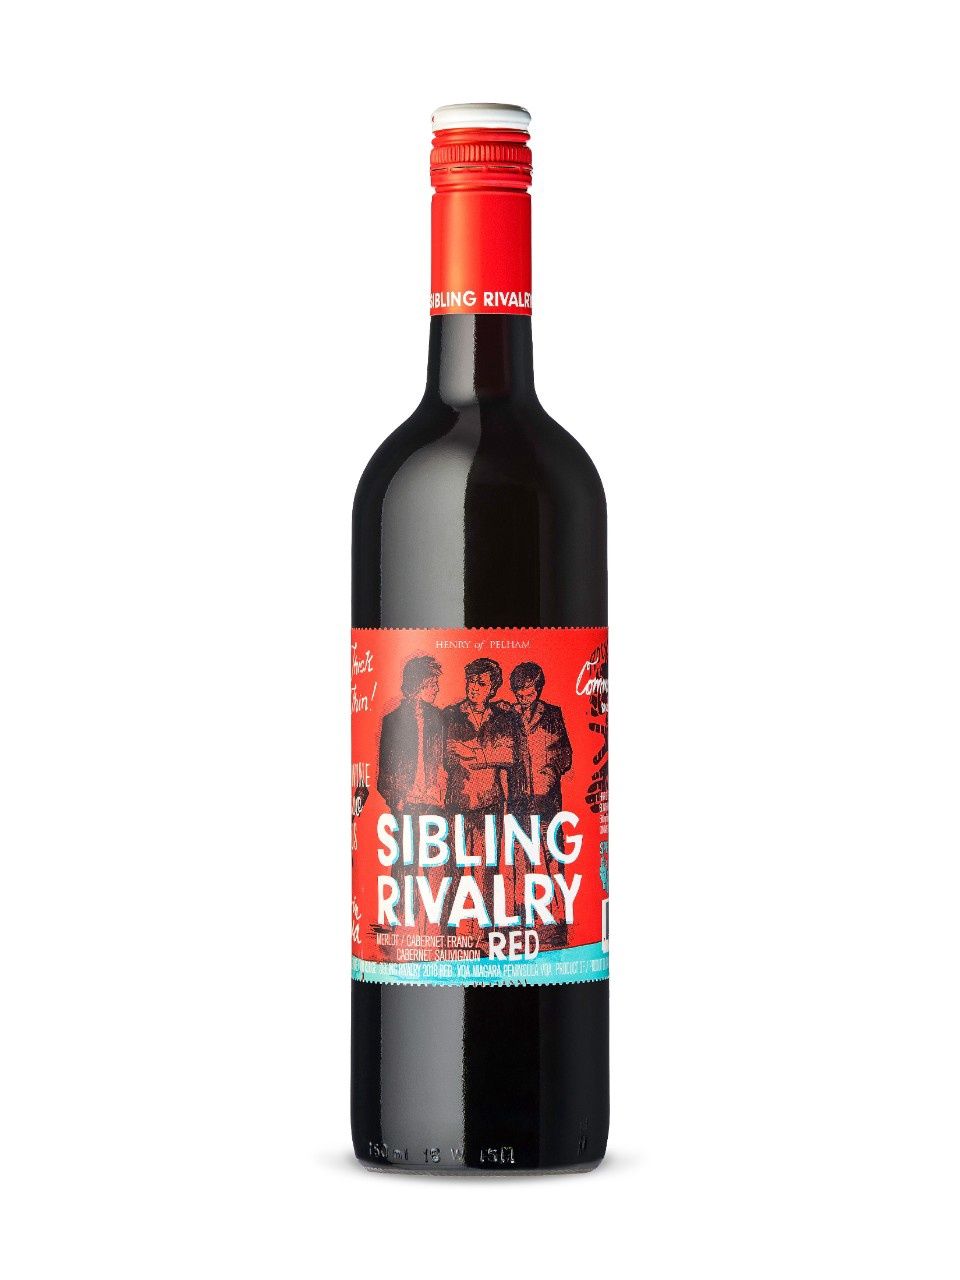 SIBLING RIVALRY RED VQA, Size: 750 ml